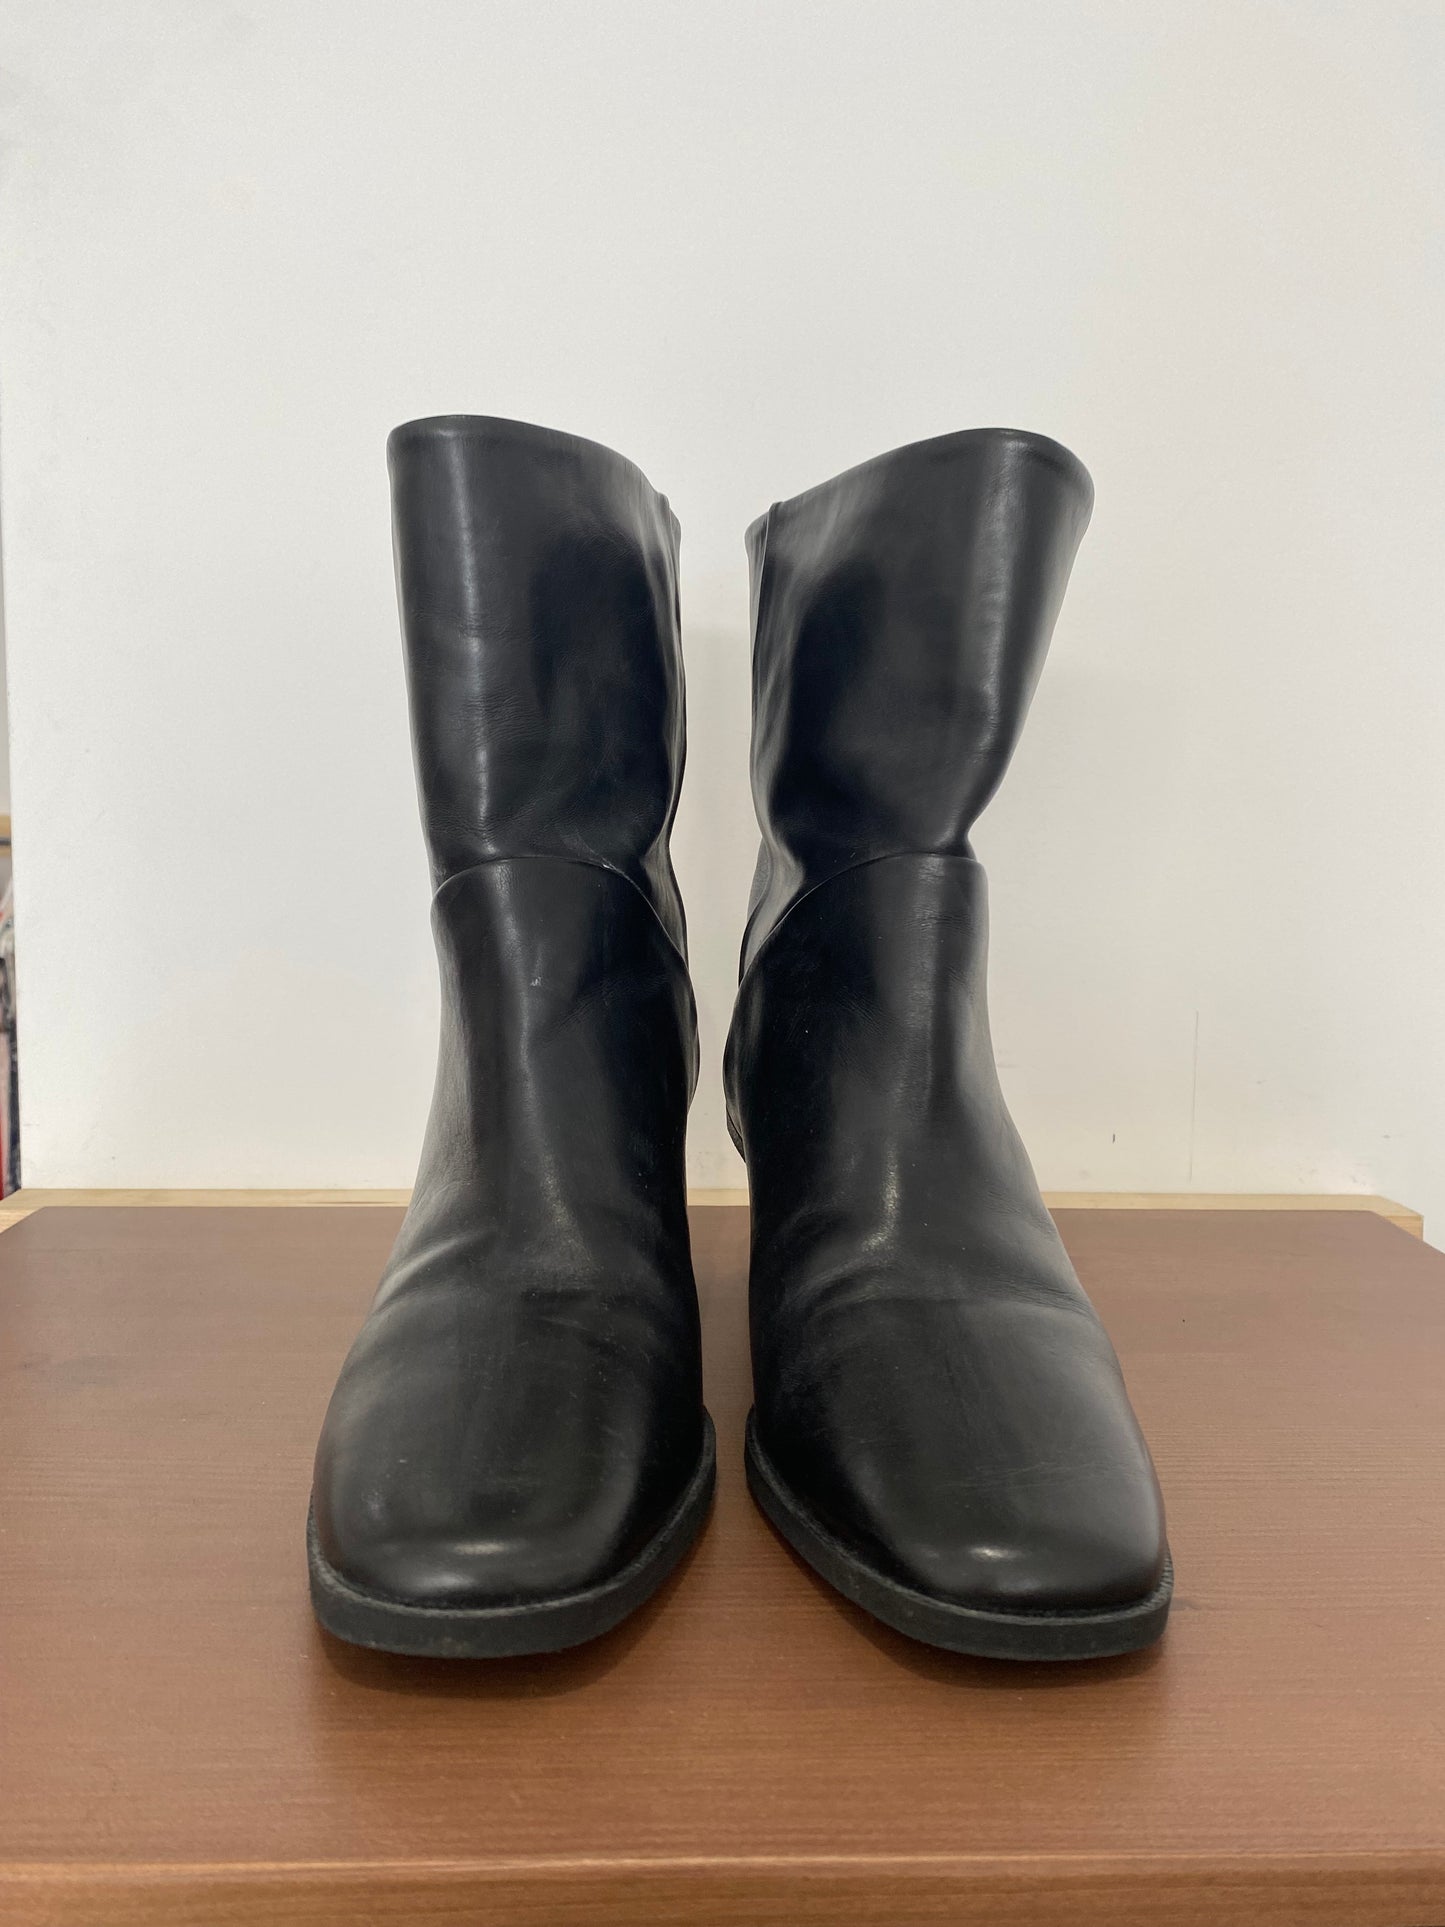 COS Black Leather Calf Length Boots Size 5